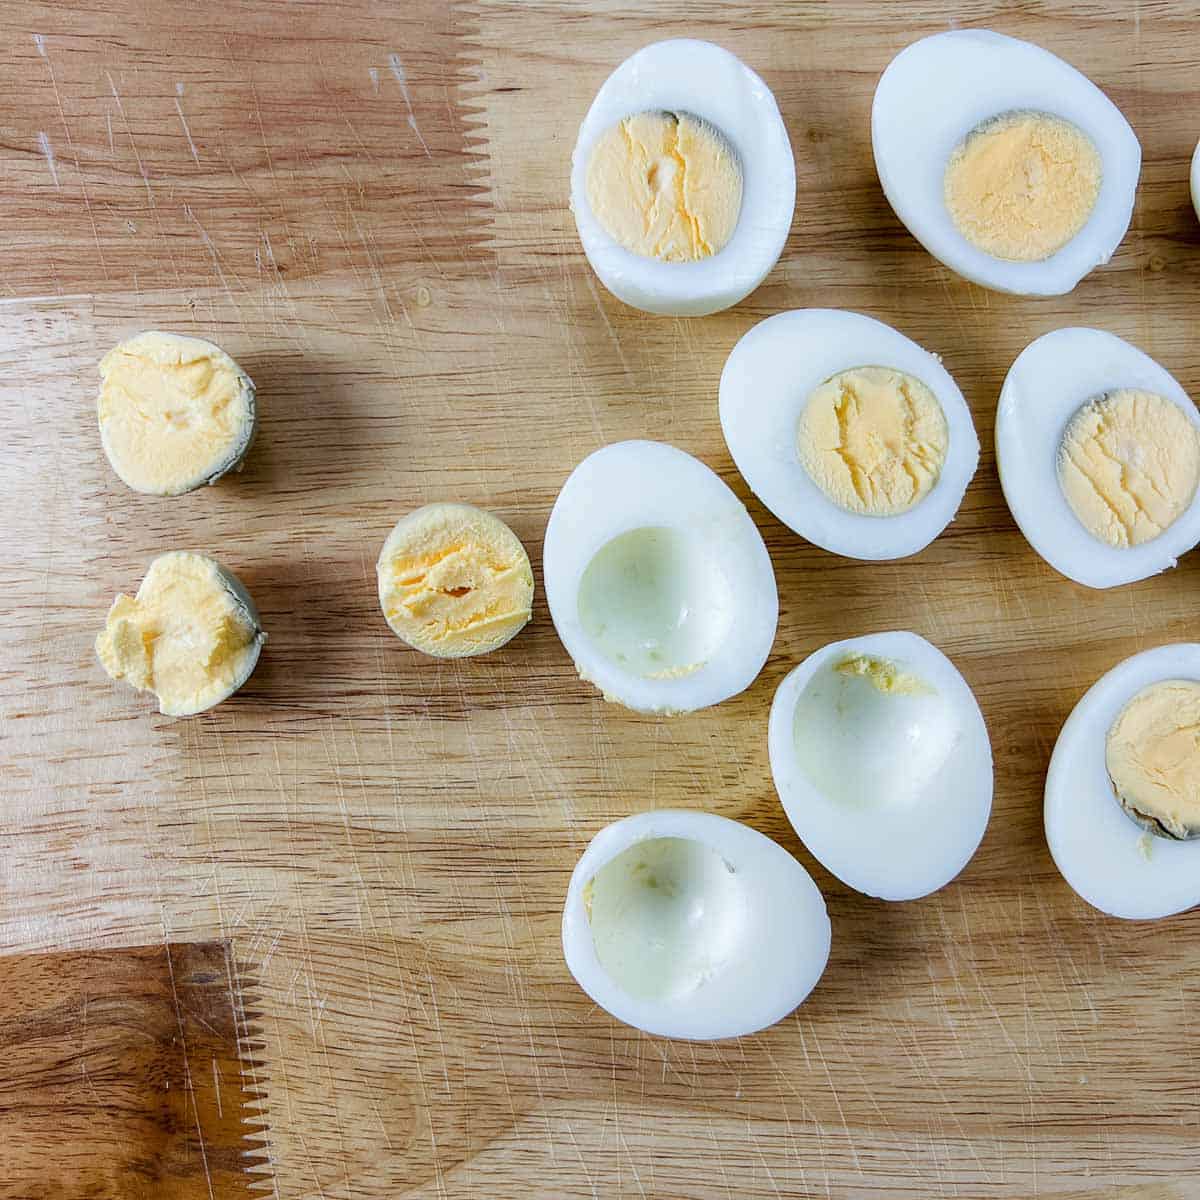 Egg yolks scooped out of the whites from hard-boiled eggs.